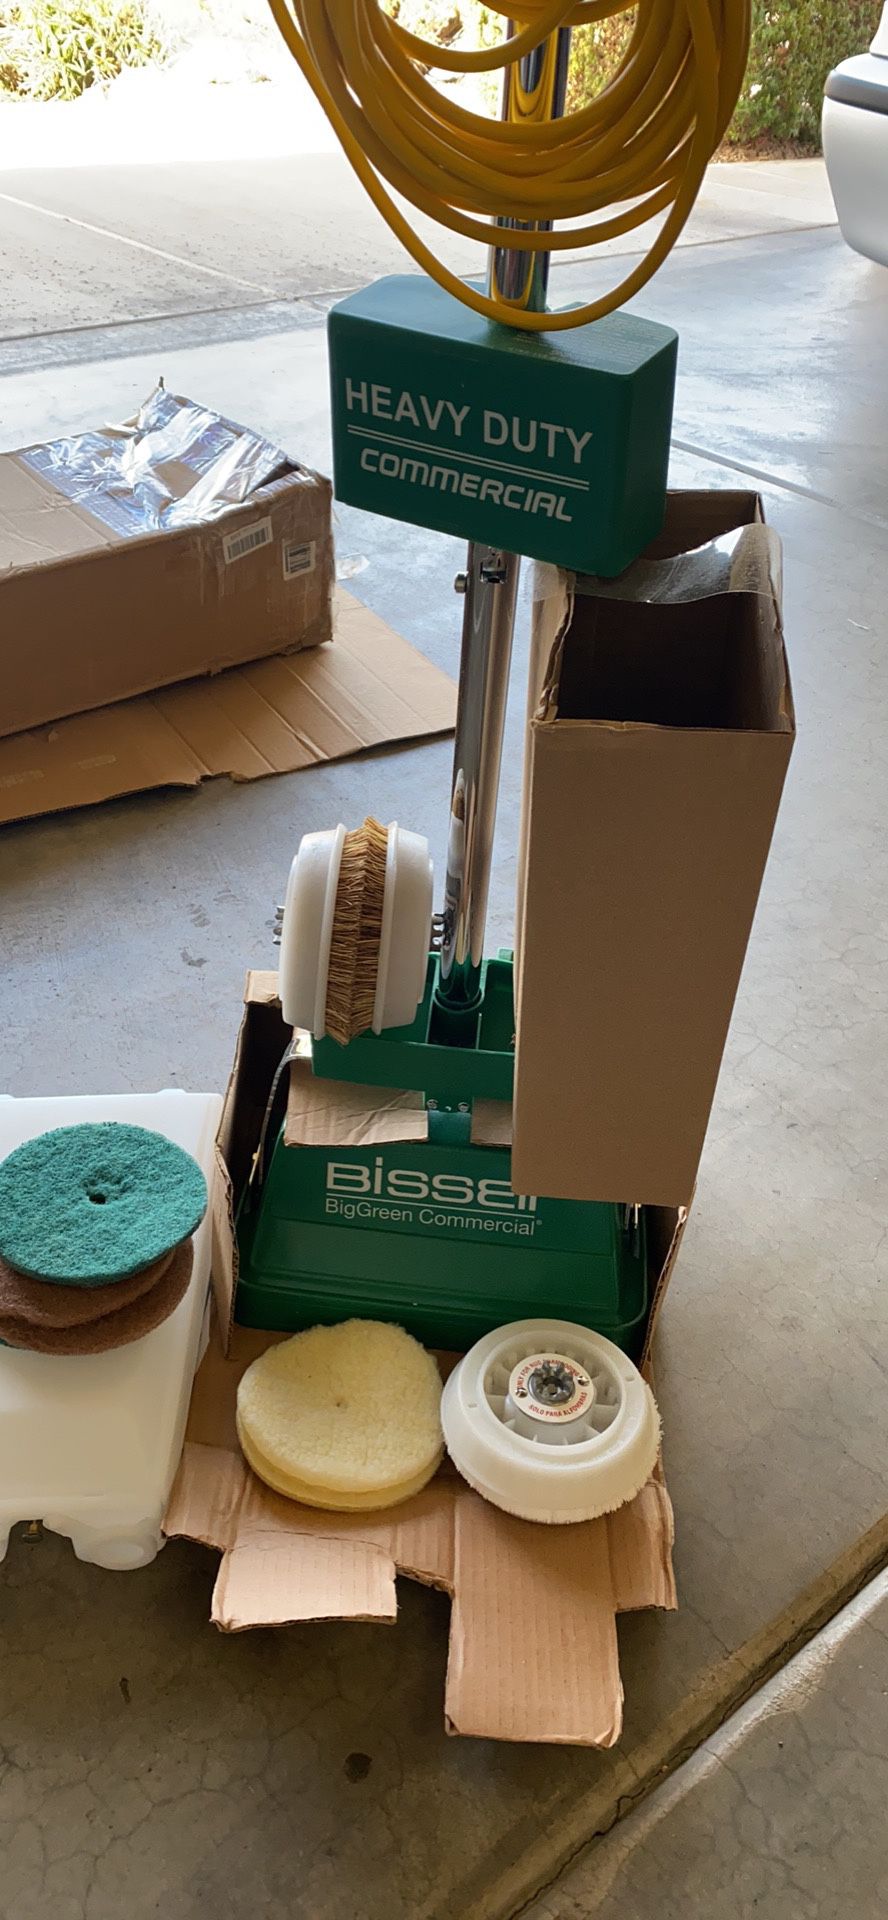 BISSELL Commercial floor scrubber and carpet cleaner